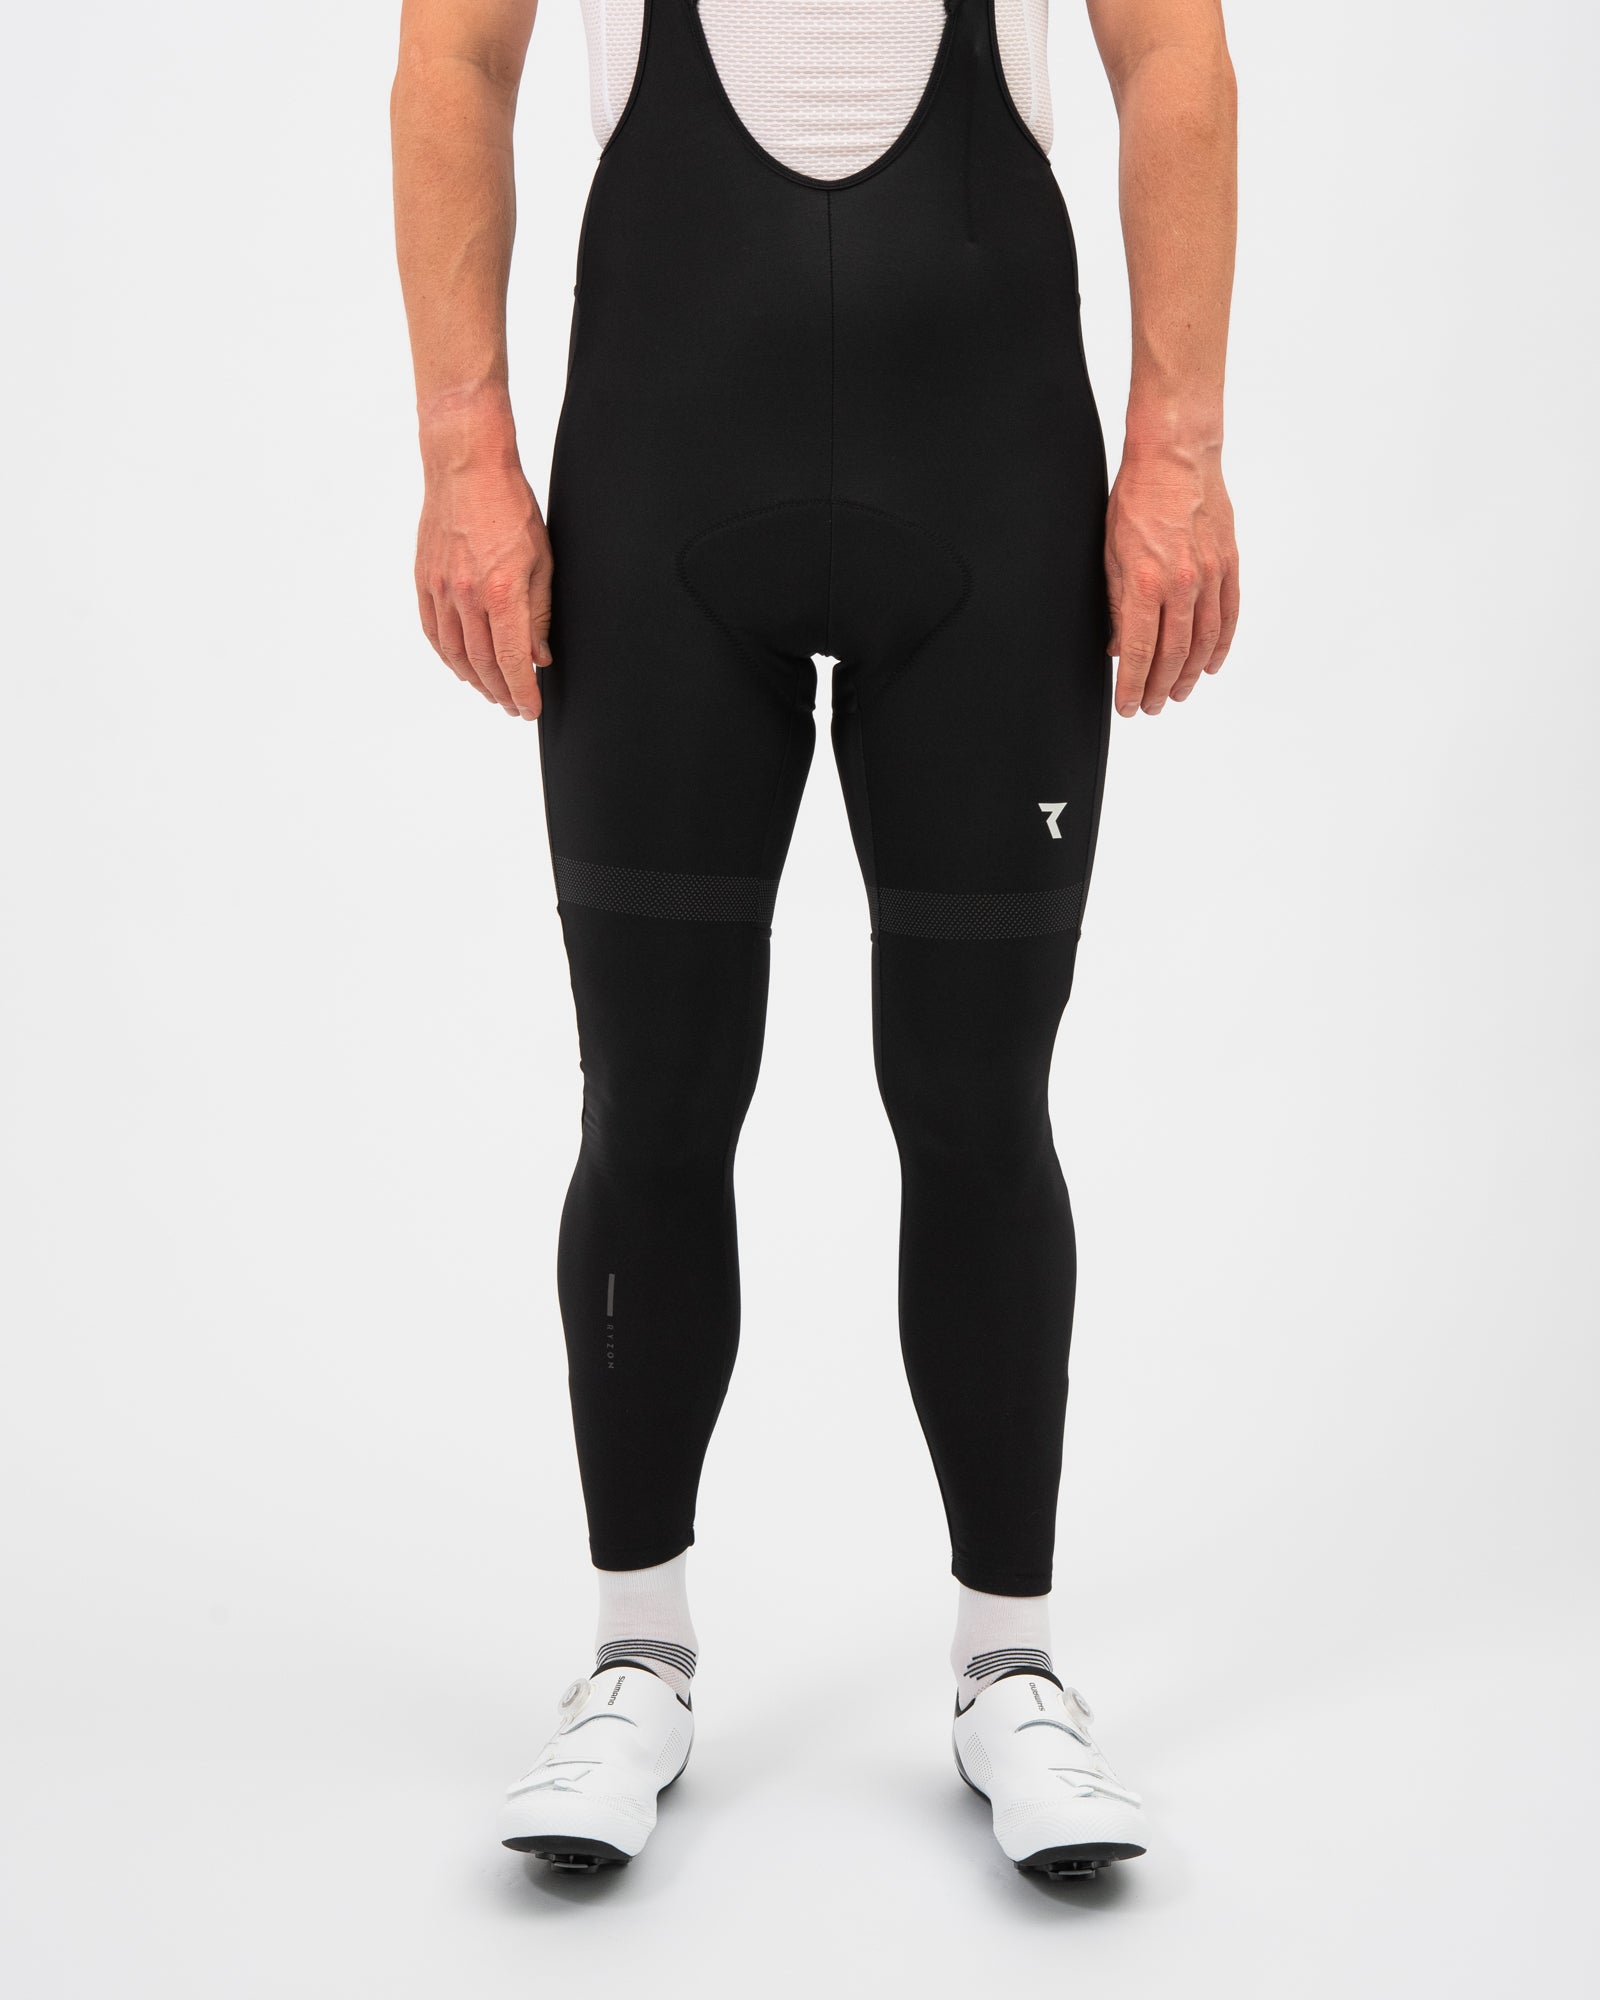 RYZON Bib Tights: Warming and water repellent